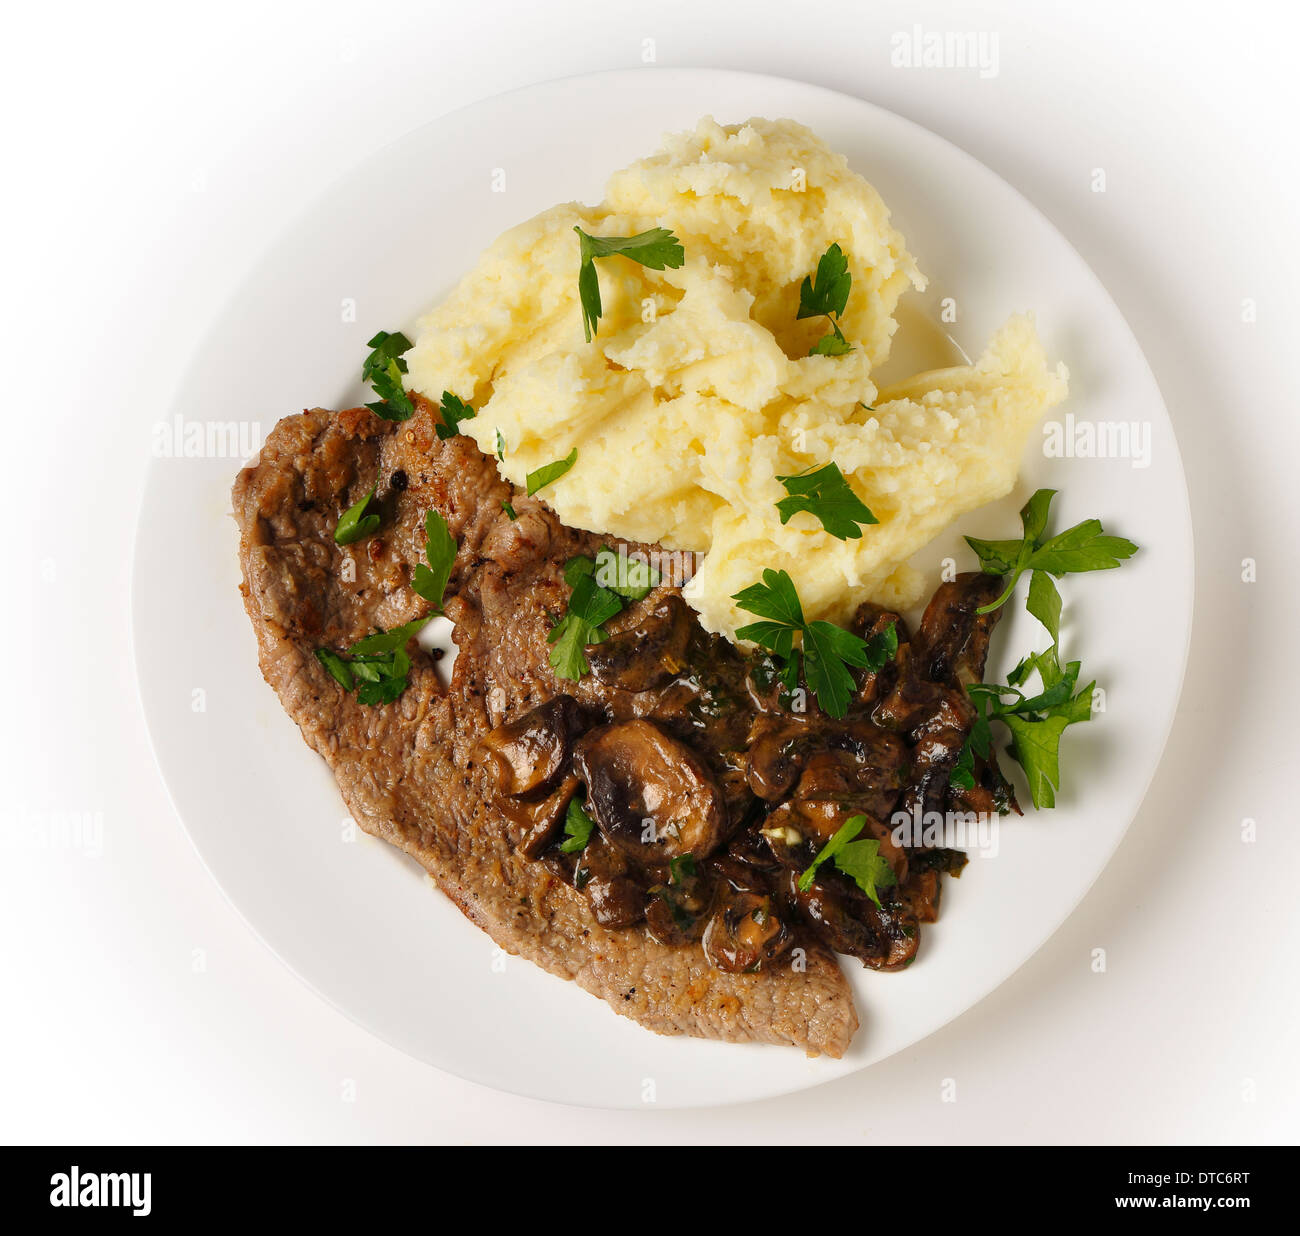 Top view of a meal of a fried veal escalope with sauteed mushrooms and mashed potatoes. Stock Photo